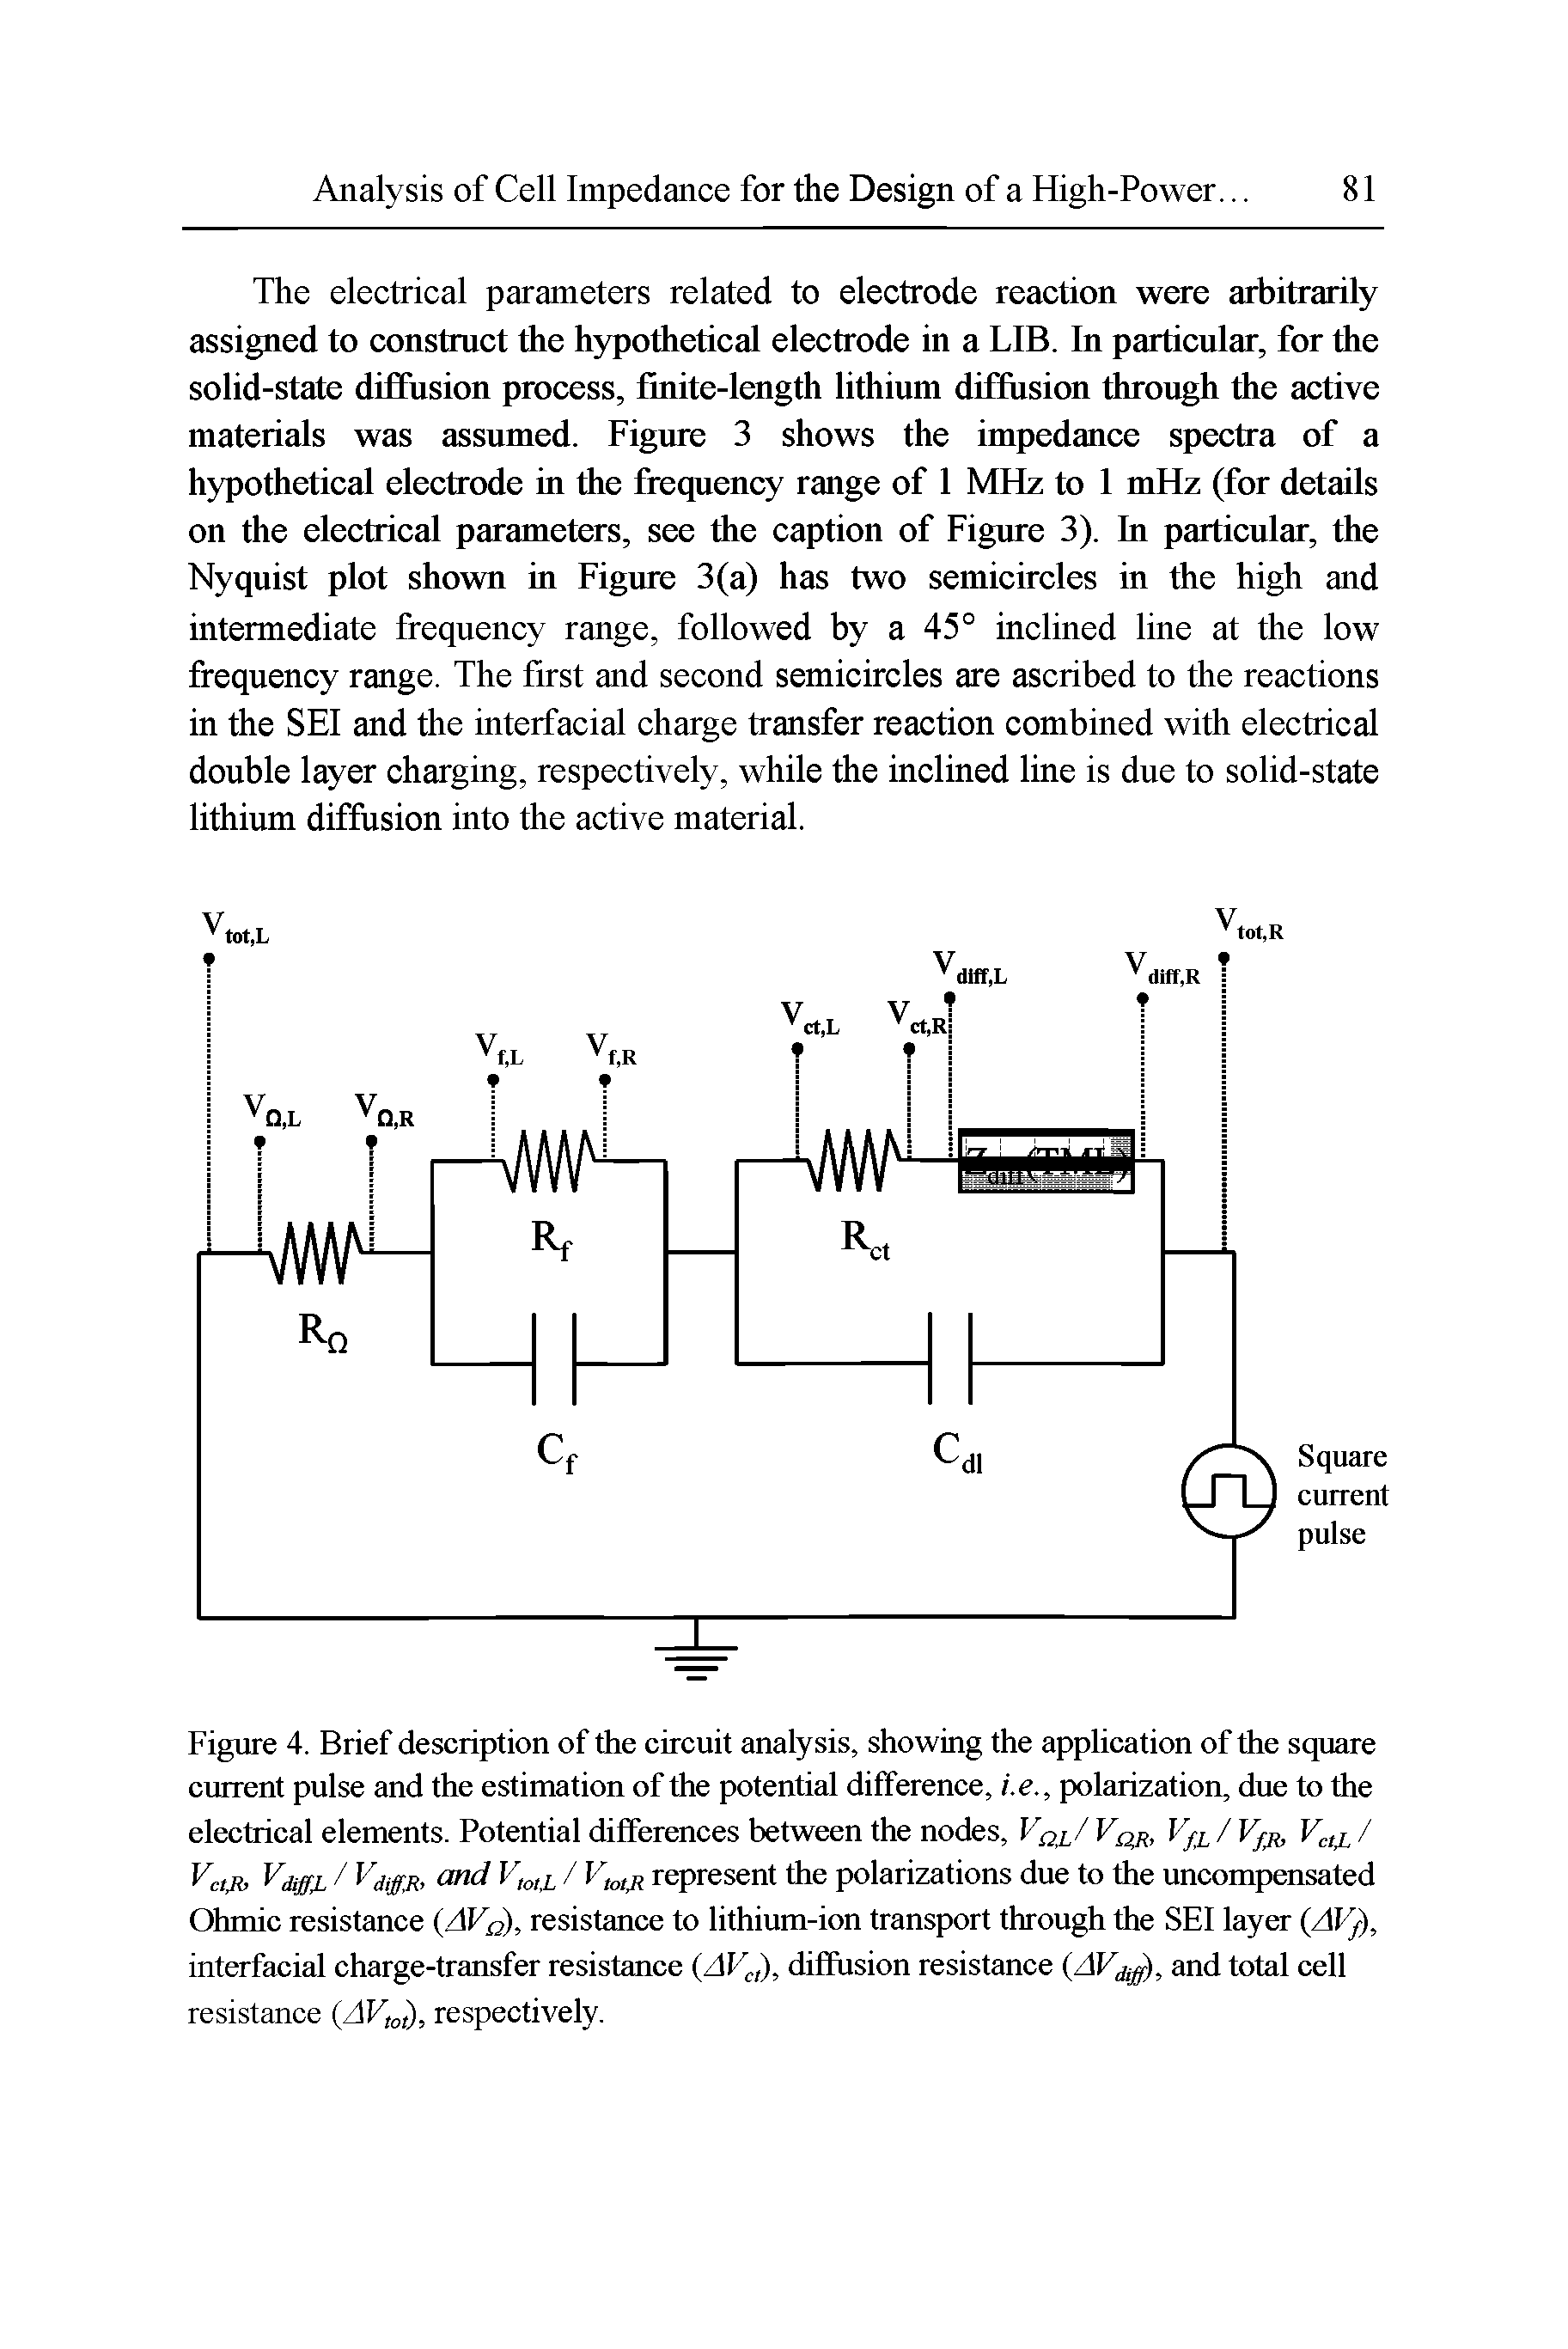 Figure 4. Brief description of the circuit analysis, showing the apphcation of the square current pulse and the estimation of the potential difference, i.e., polarization, due to the electrical elements. Potential differences between the nodes, Vqh, / Vfjt, / Vcijb and V,, i / represent the polarizations due to the uncompensated...